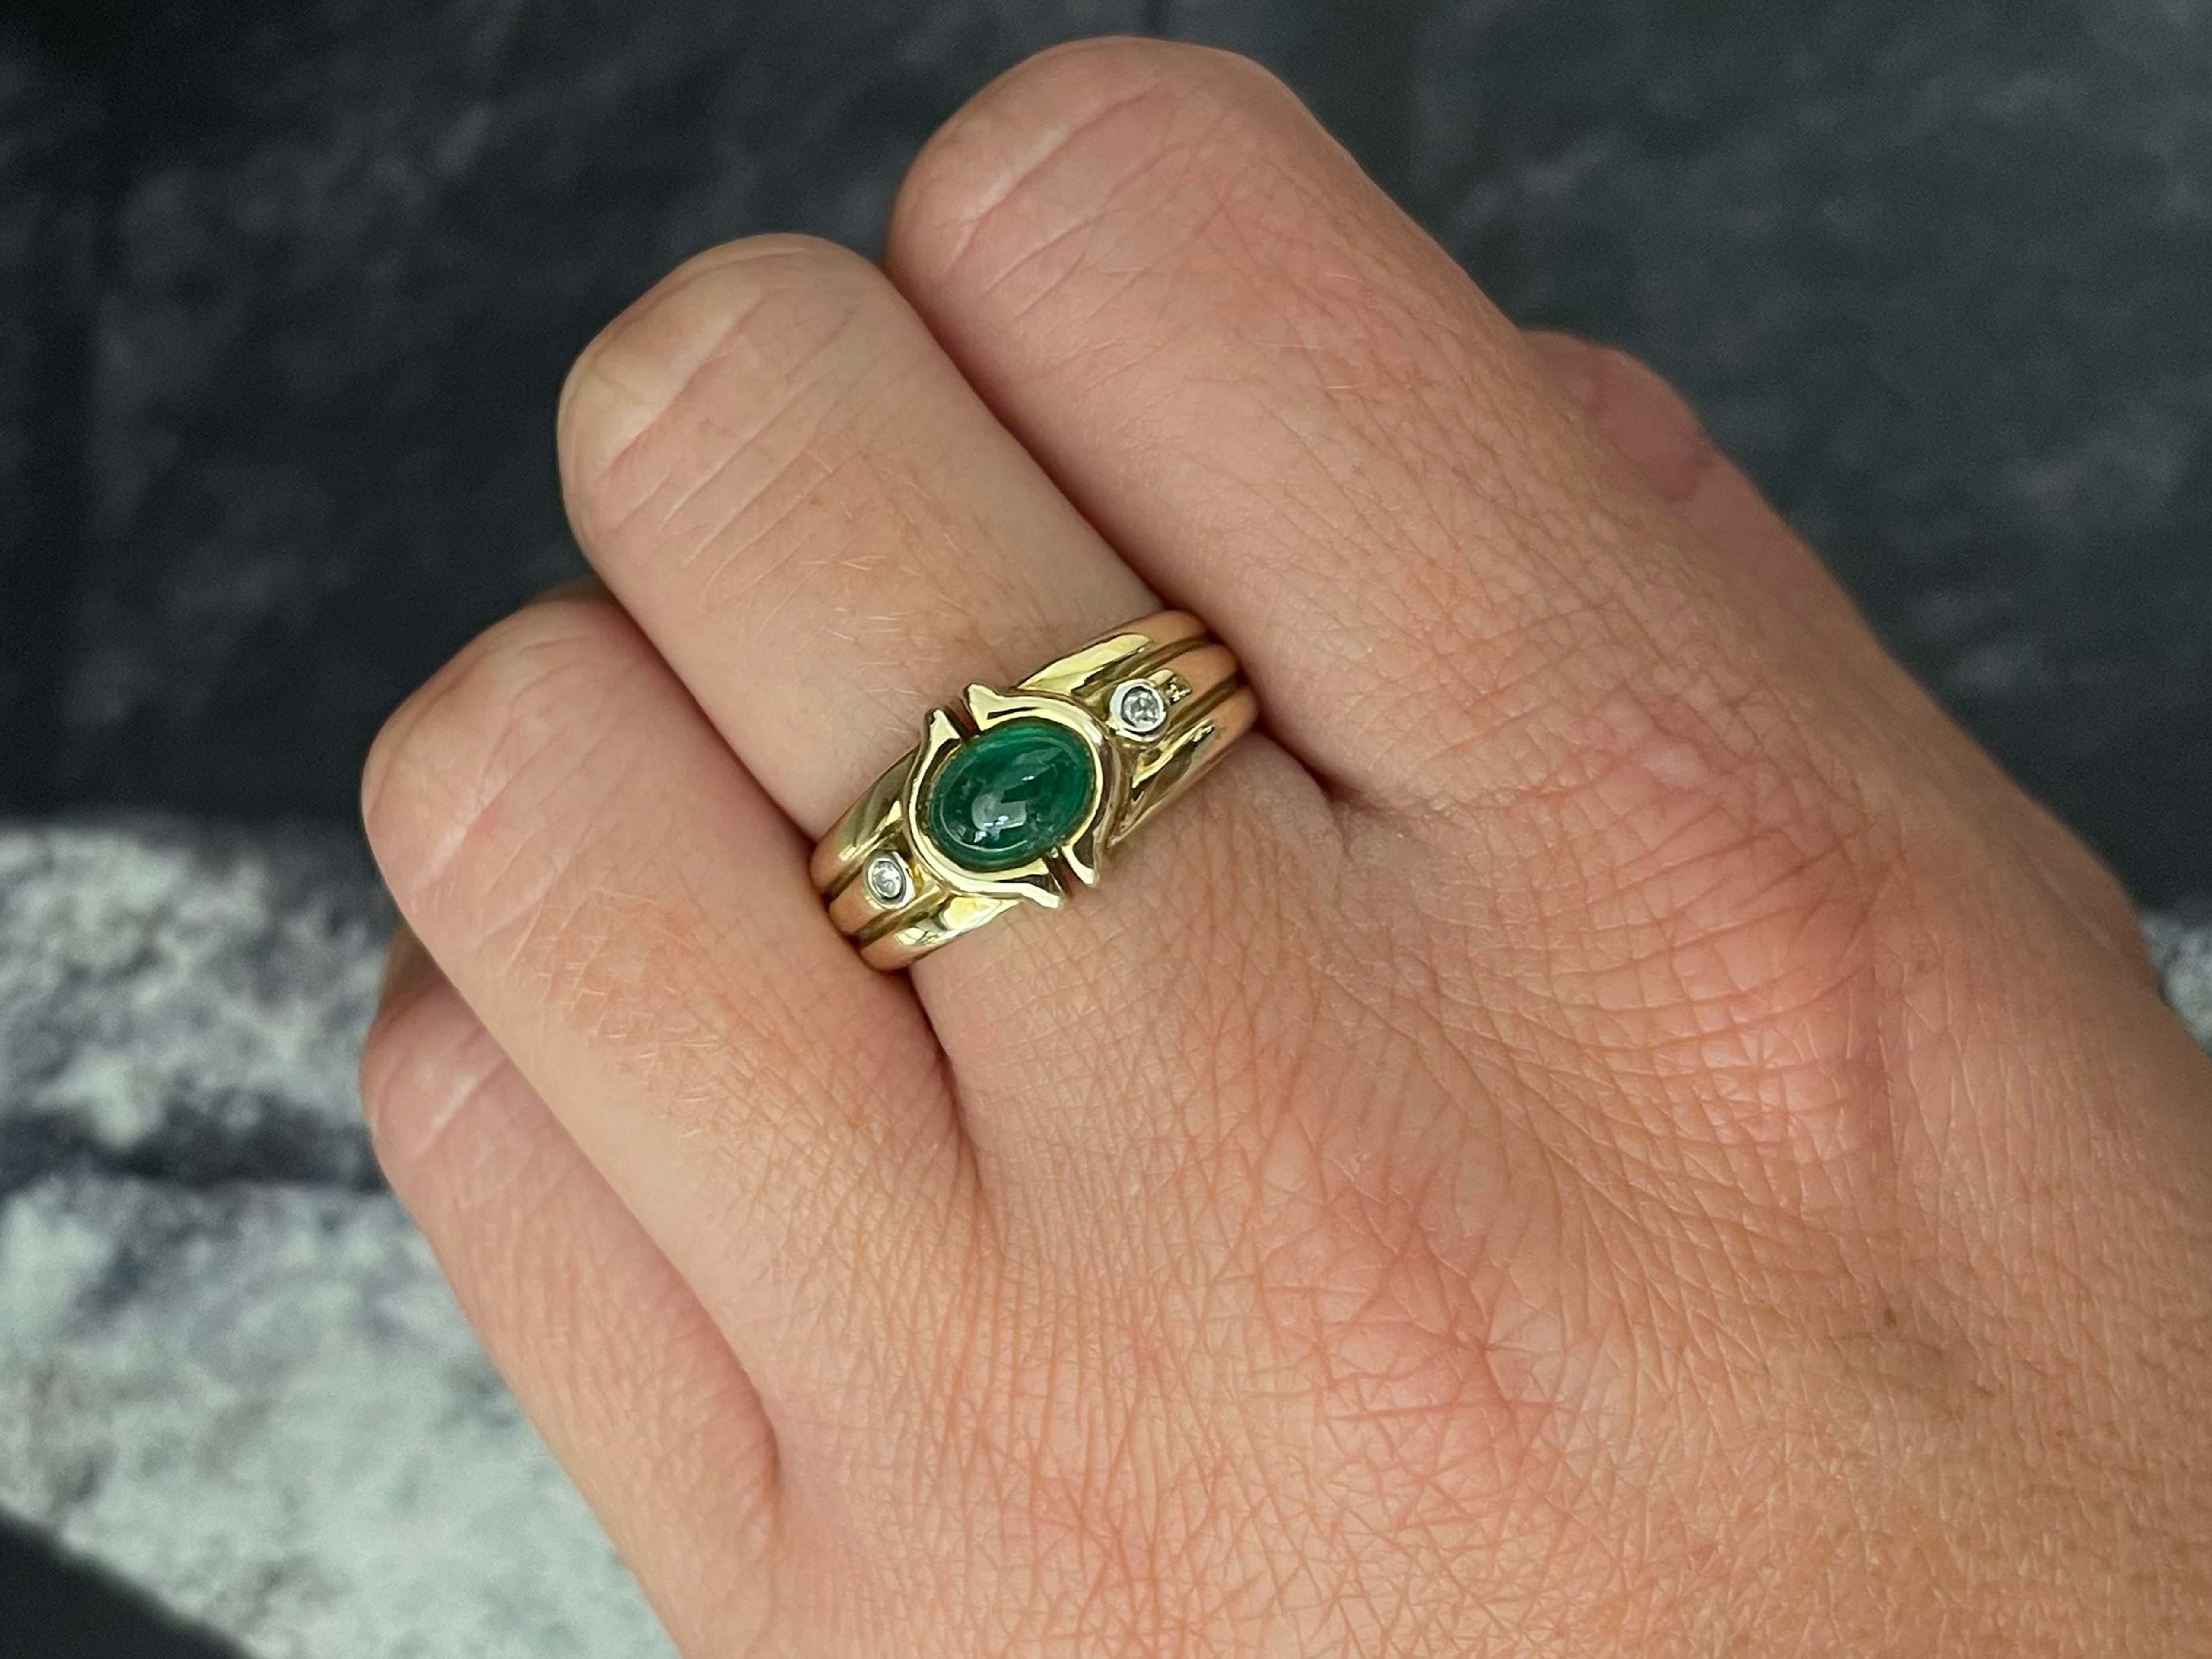 Item Specifications:

Metal: 14K Yellow Gold

Style: Statement Ring

Ring Size: 7.25 (resizing available for a fee)

Total Weight: 5.3 Grams
​
​Diamond Color: H-I
​
​Diamond Clarity: SI2
​
​Diamond Carat Weight: 0.05

Gemstone